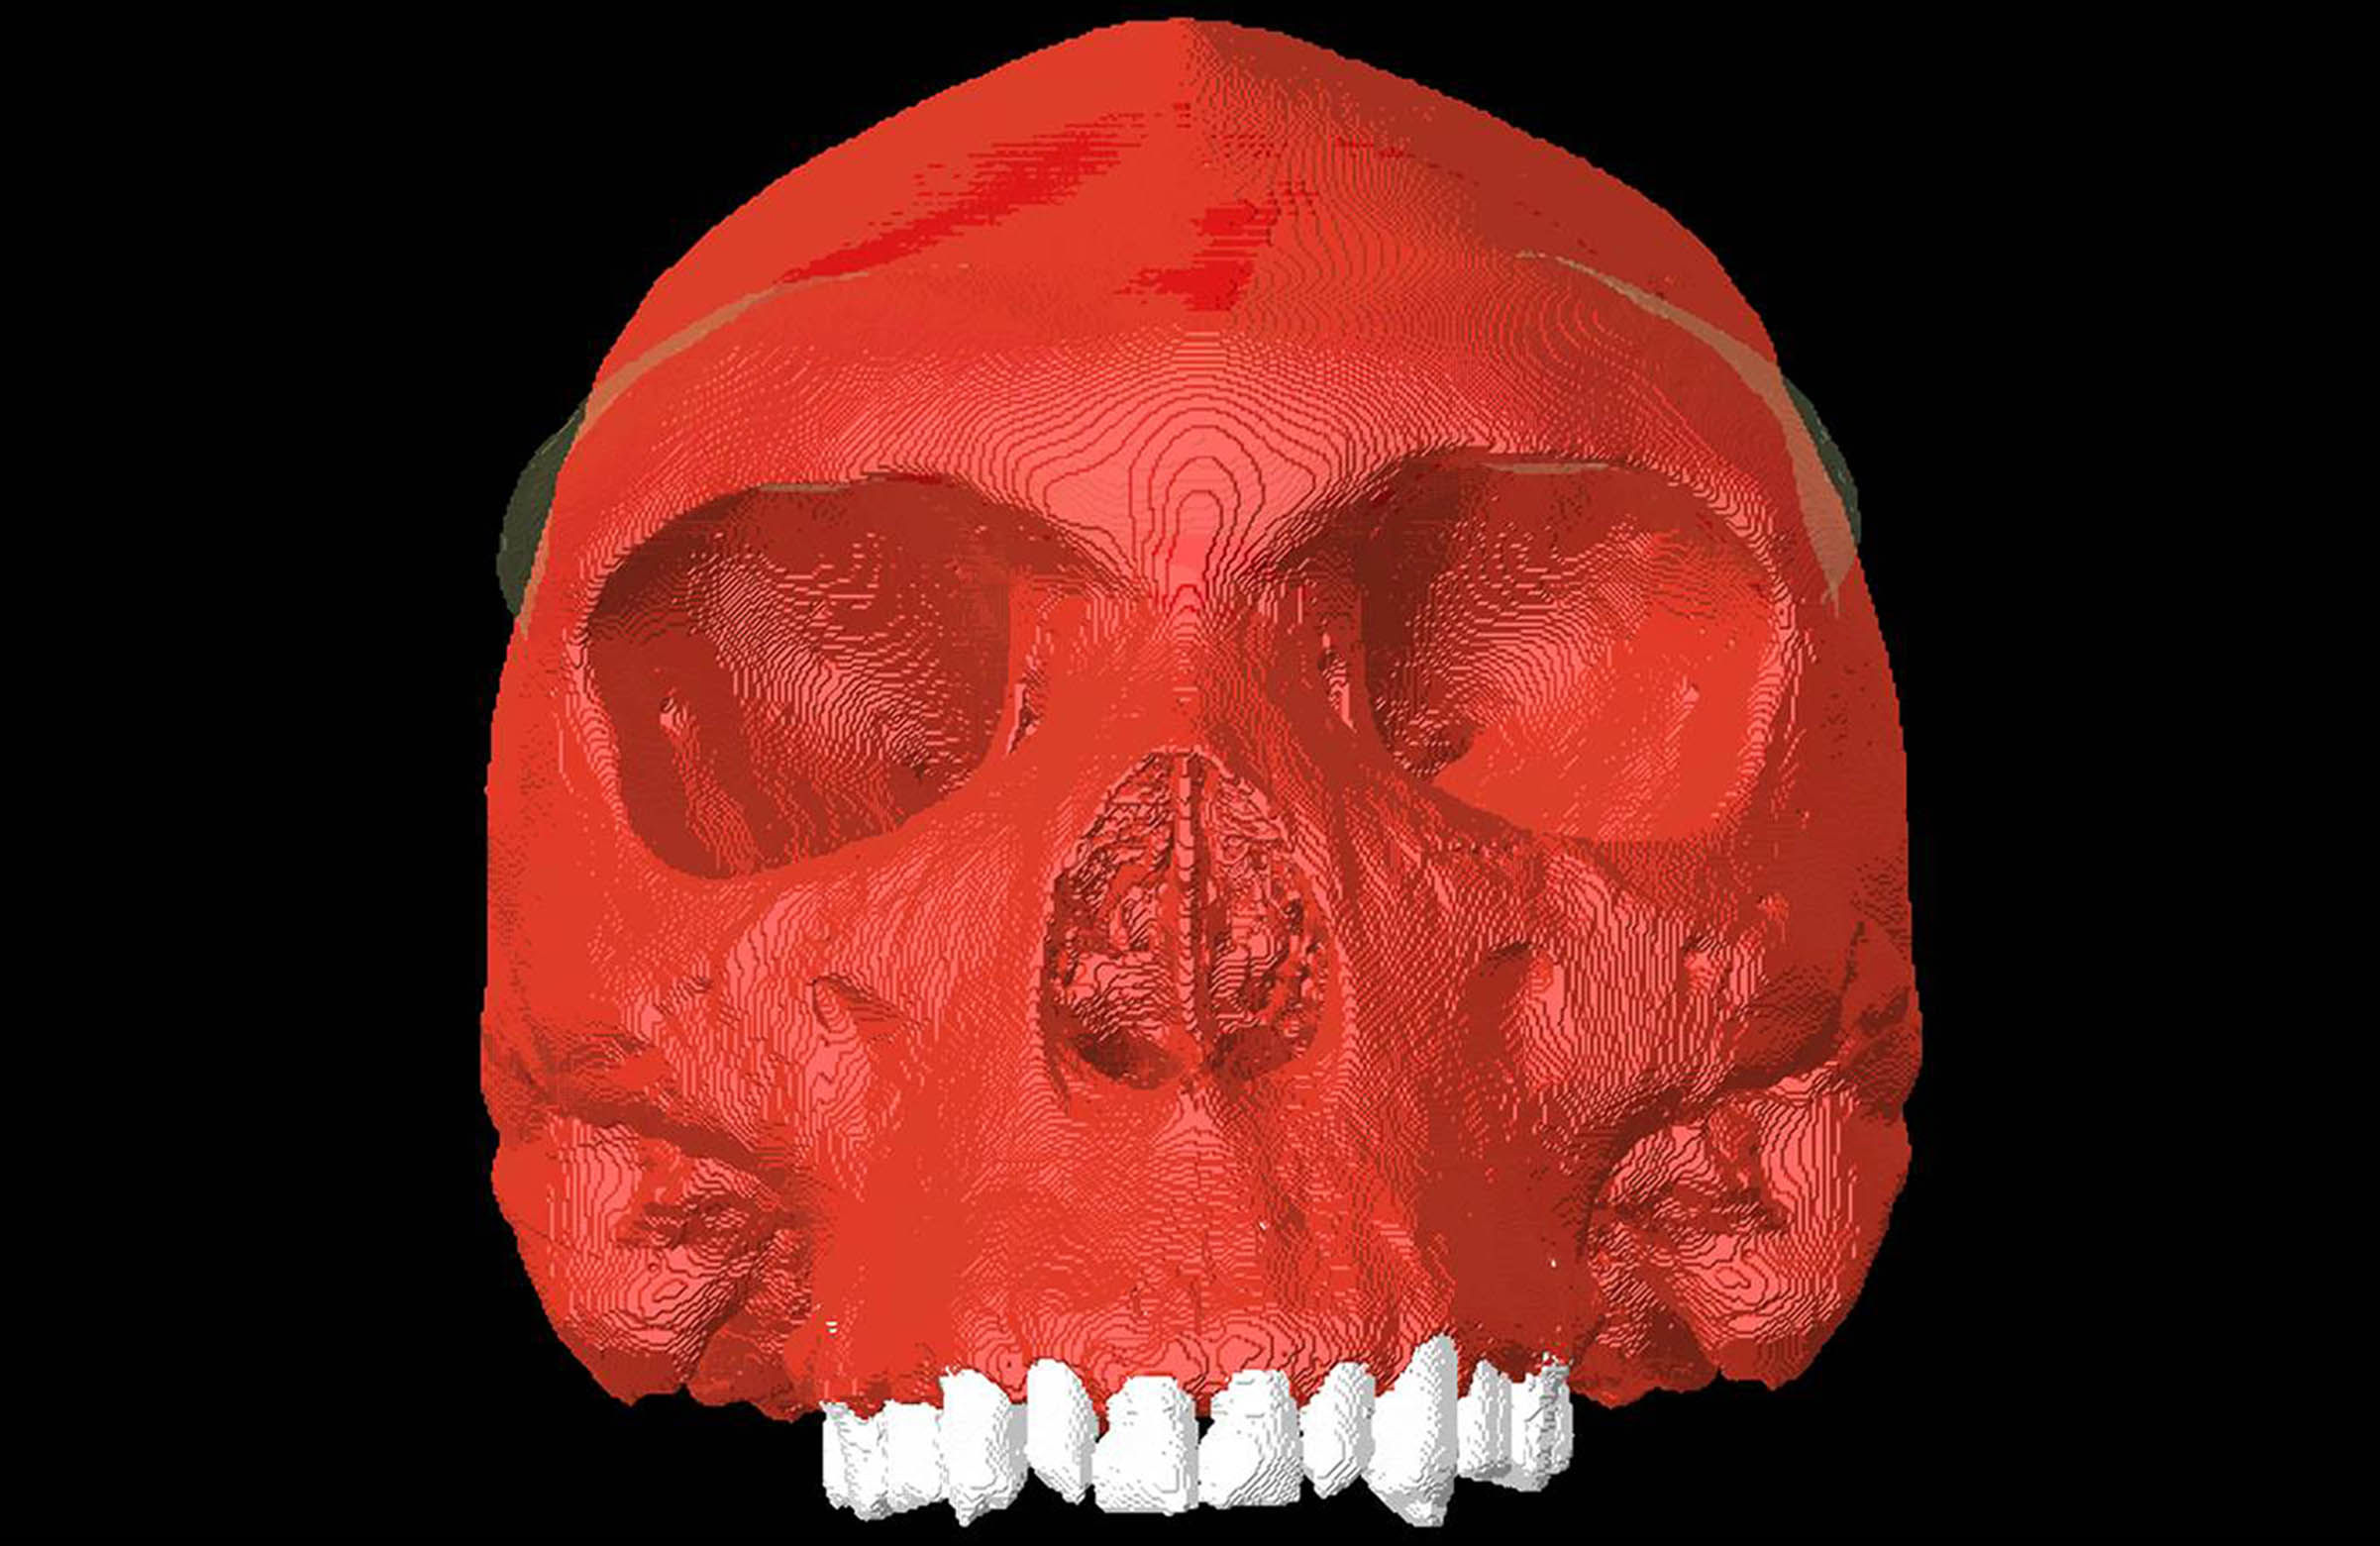 A 3D computer simulation of a skull from Zambia known as Kabwe 1 housed at London's Natural History Museum (University of York/PA)